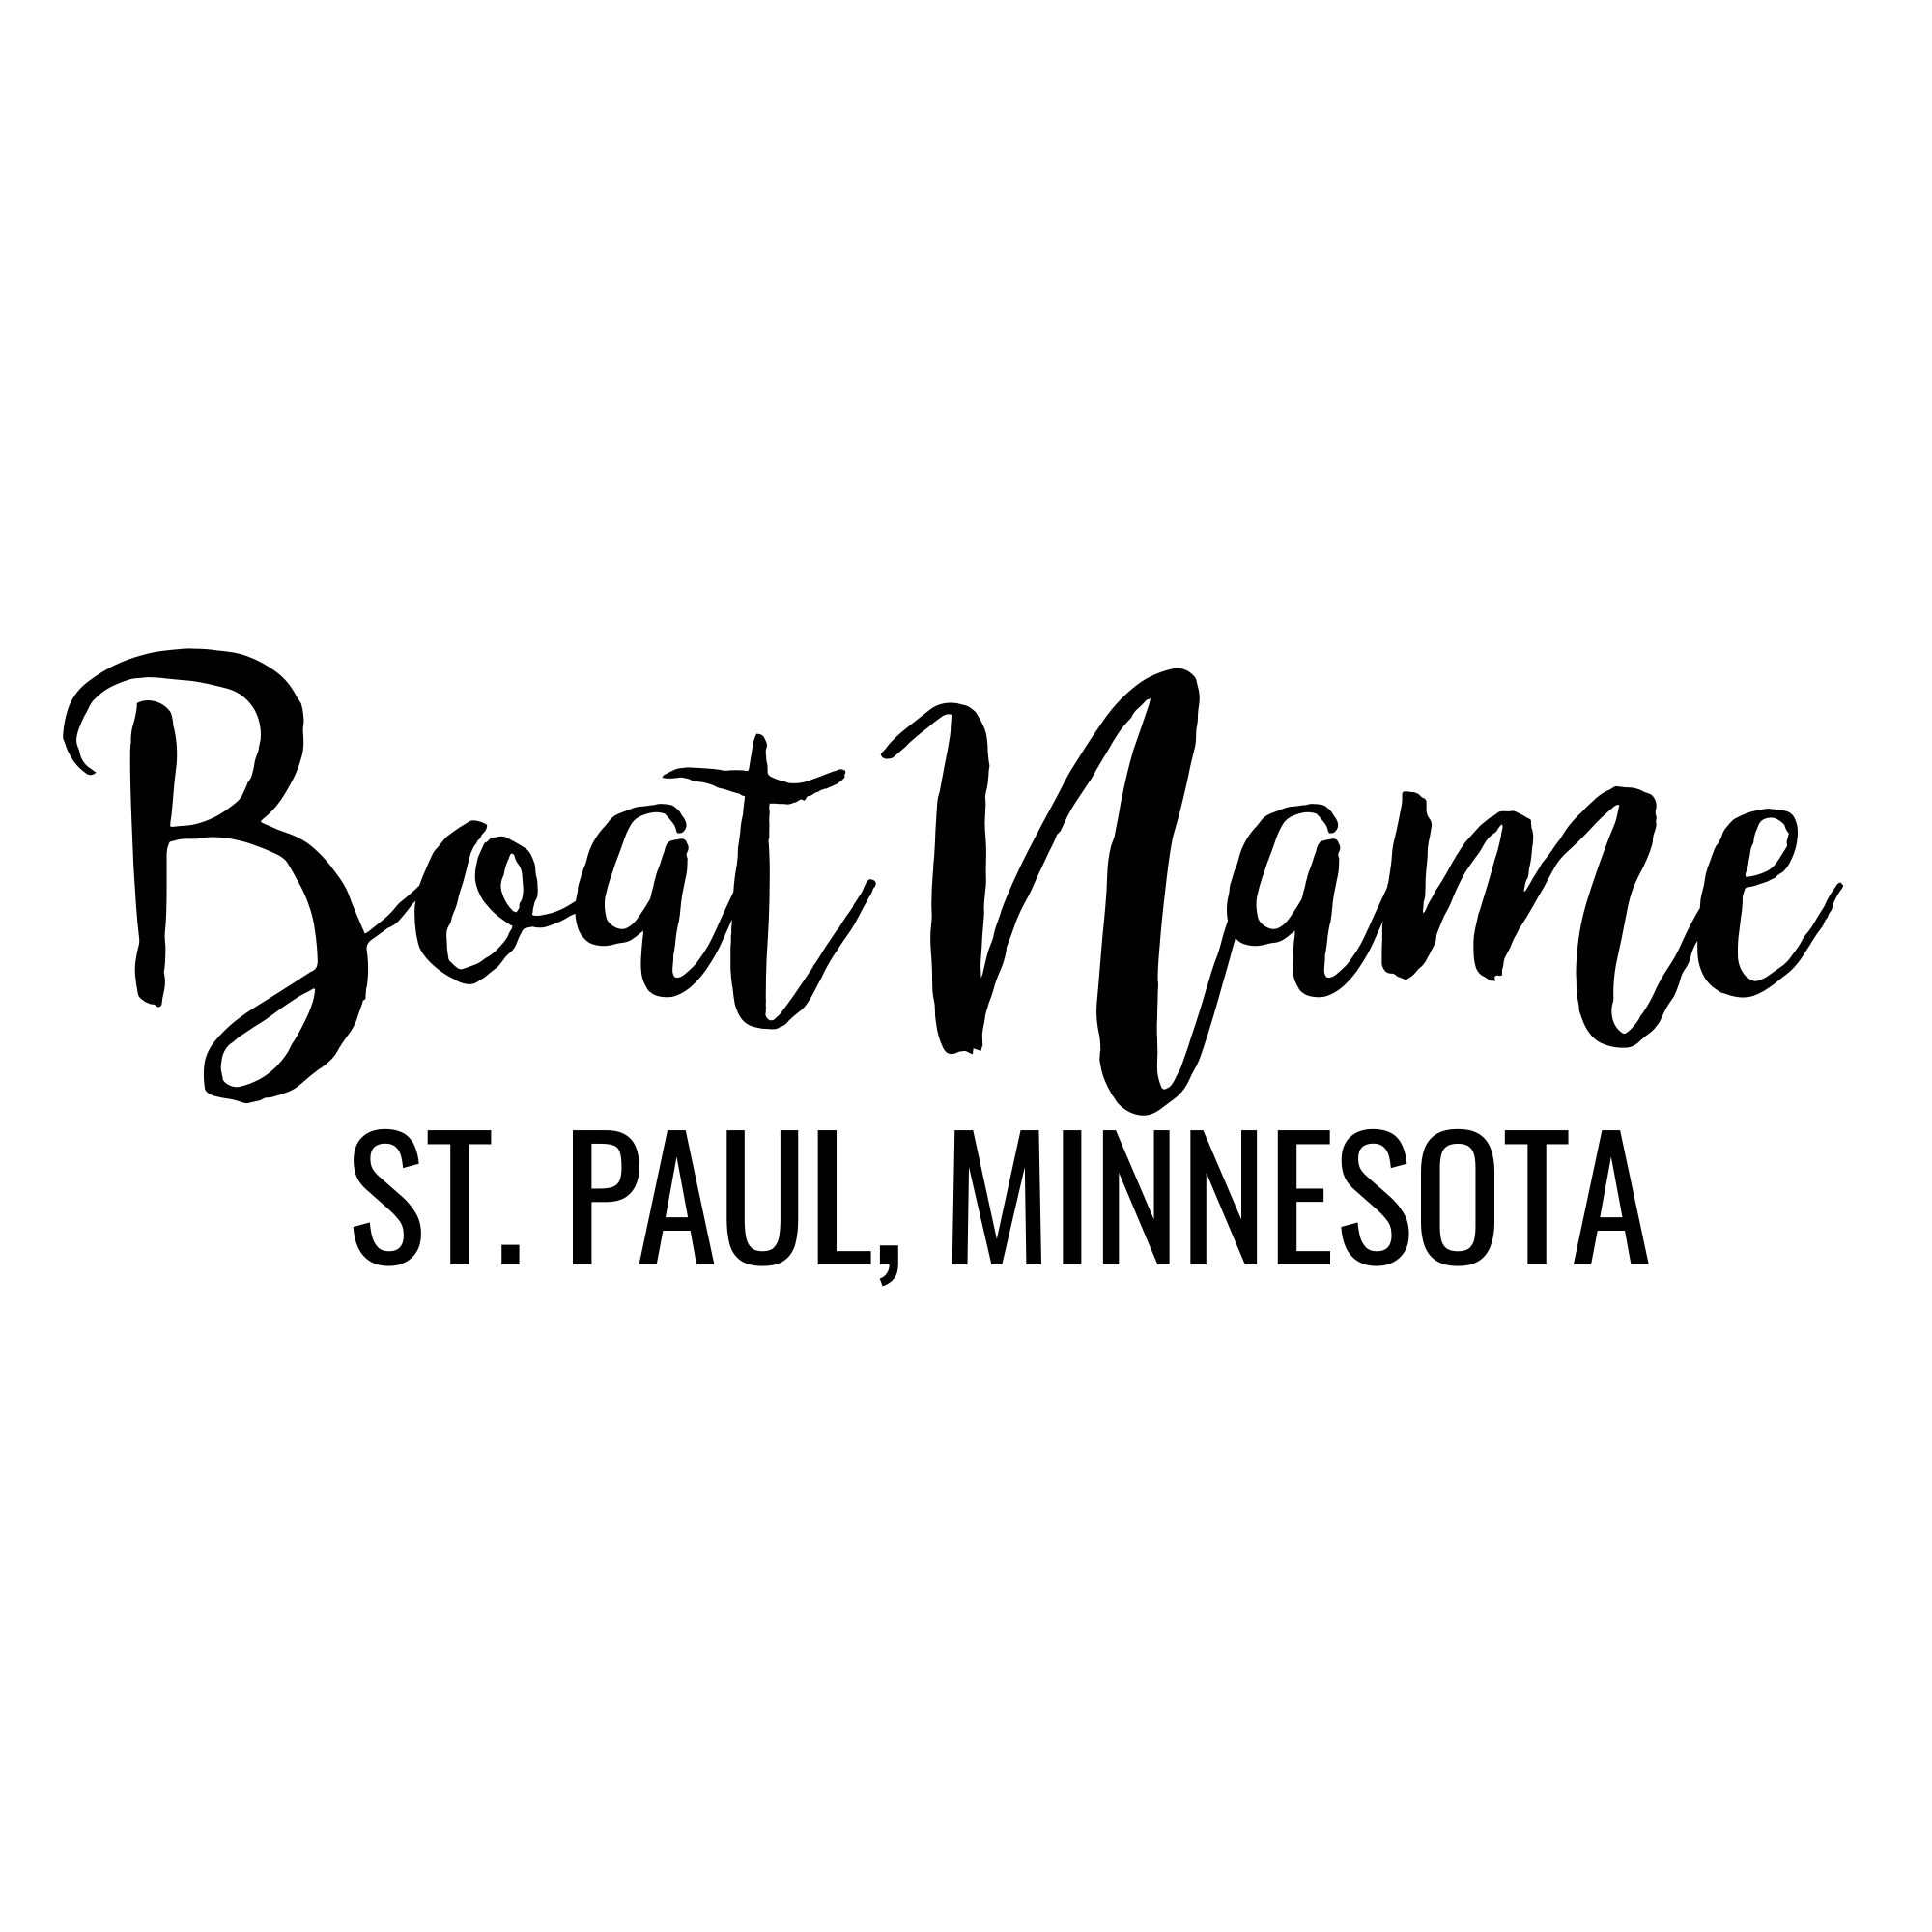 Personalized Boat Name Vinyl Decal with Hailing Port State - Permanent Marine-Grade for Signs, Speed boat, Fishing Vessel, Watercraft C20, B1